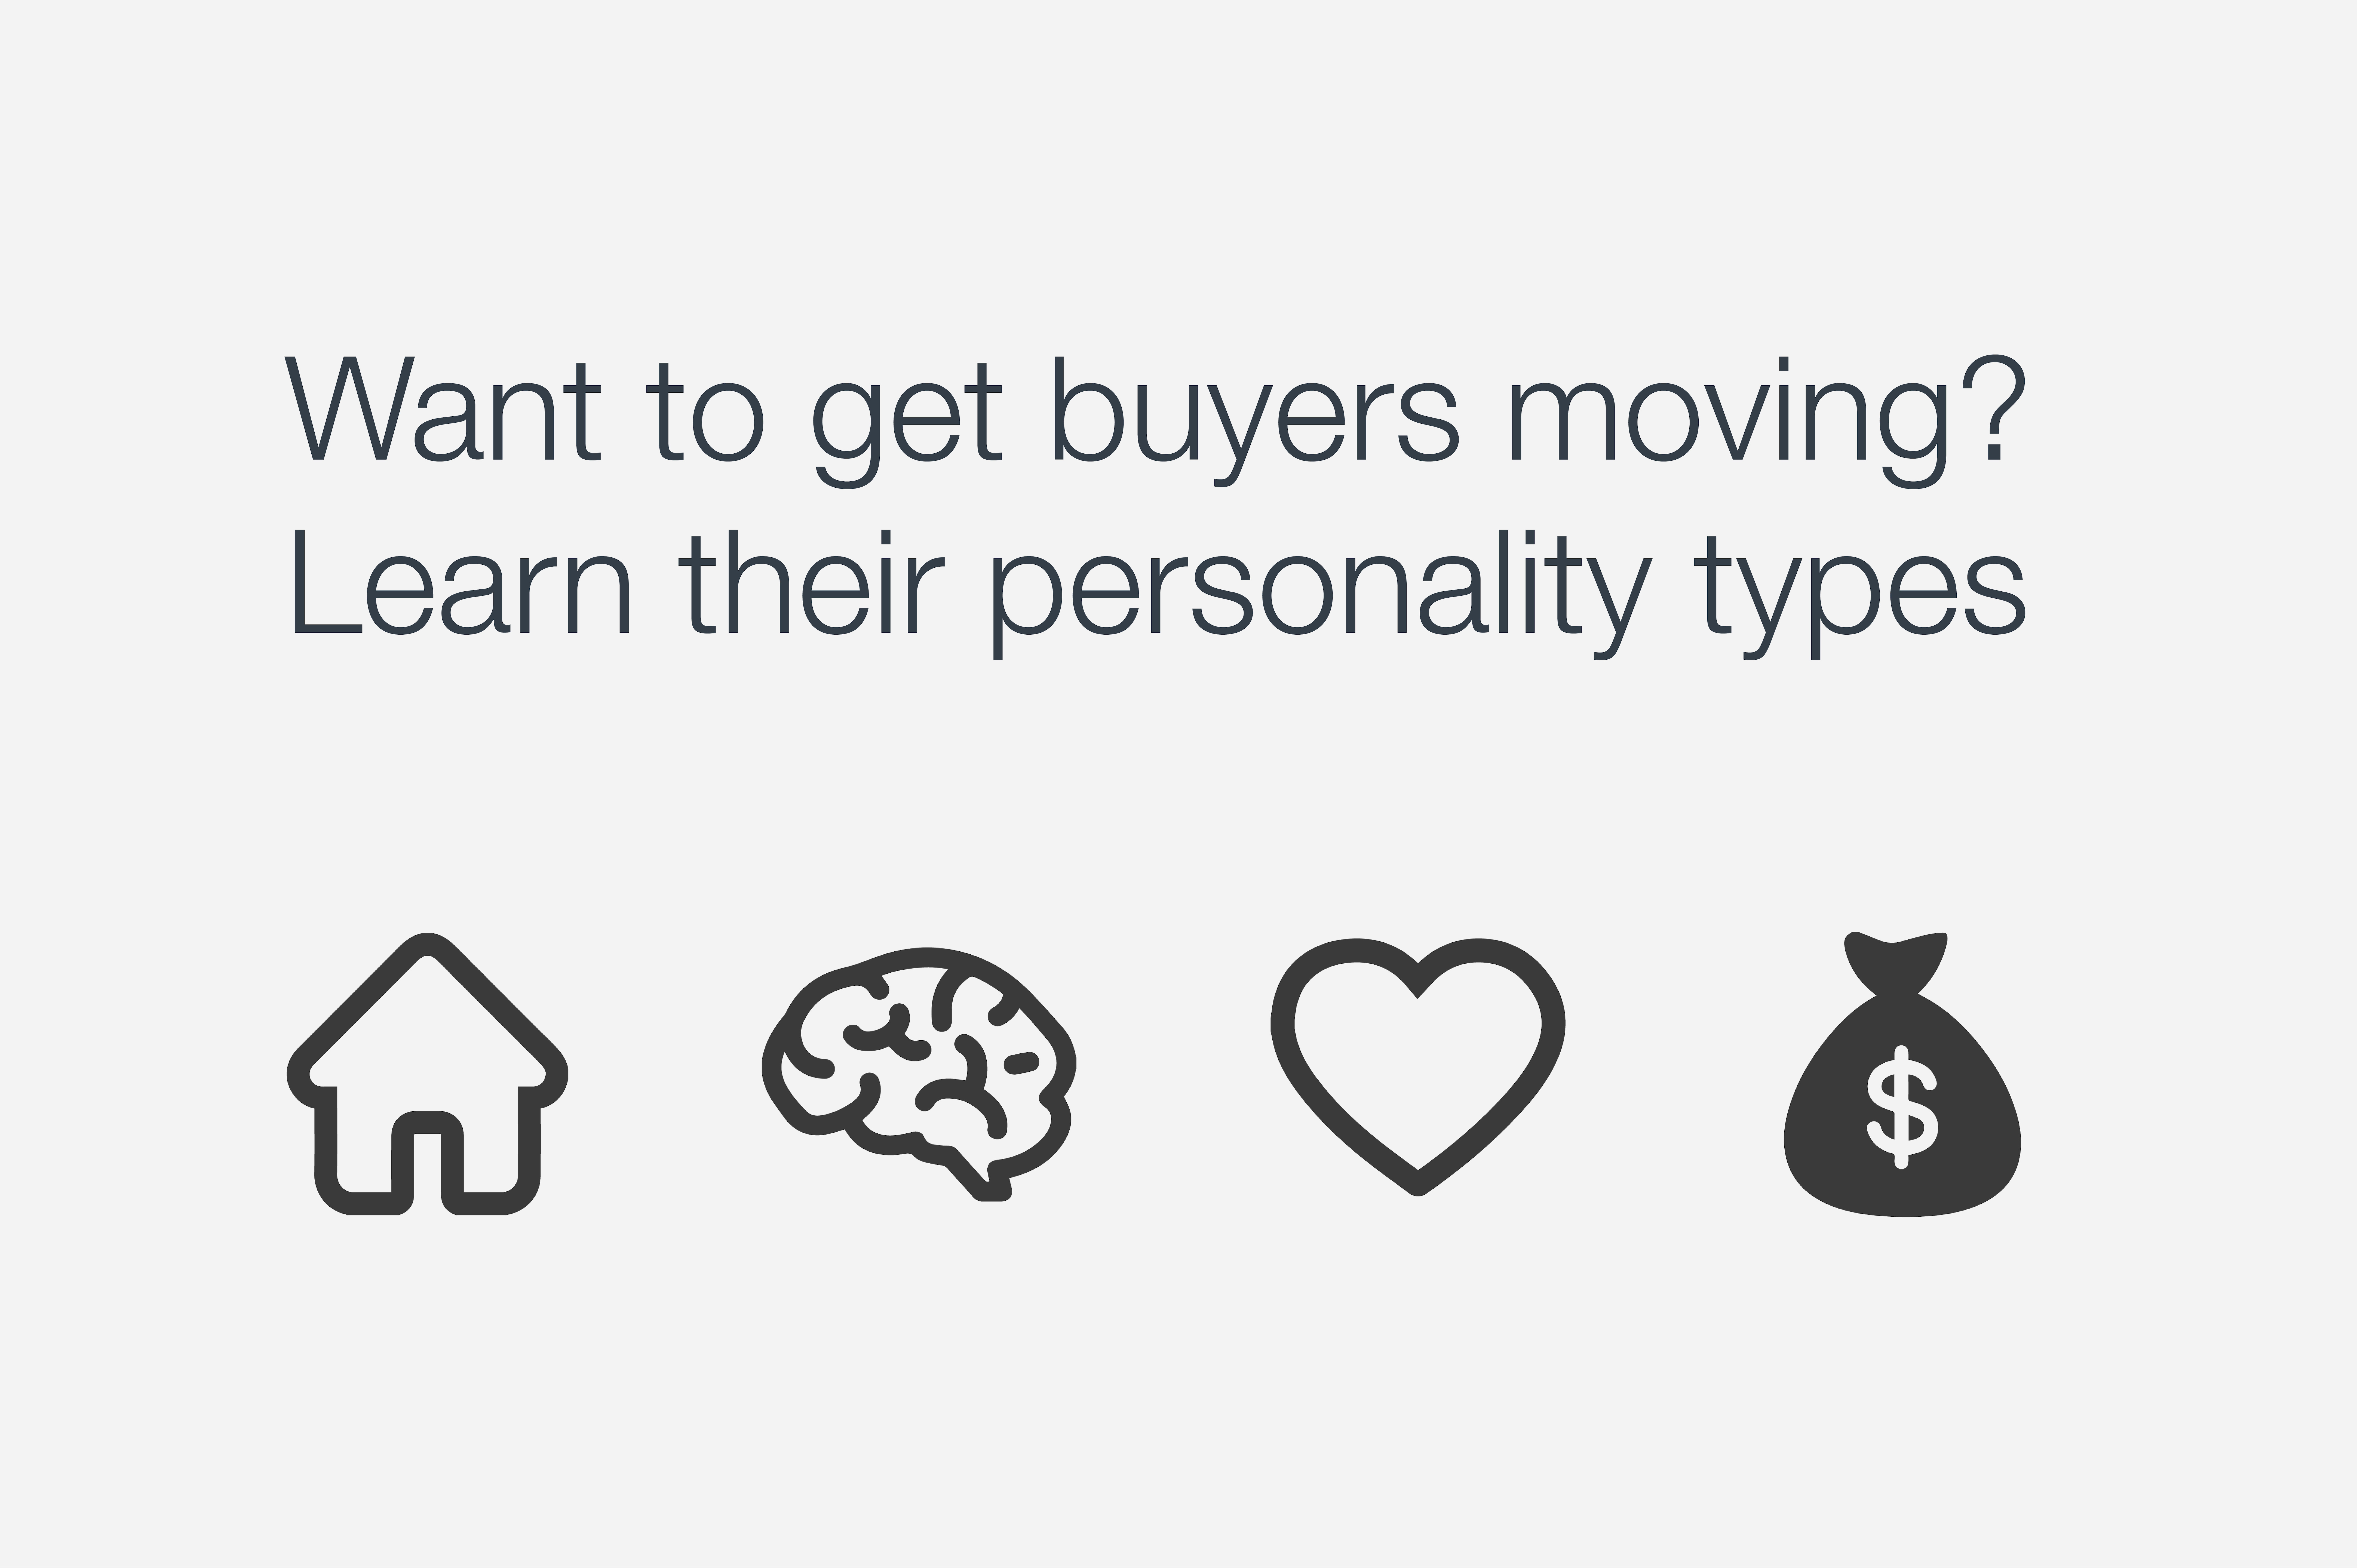 Want to get buyers moving? Learn their personality types